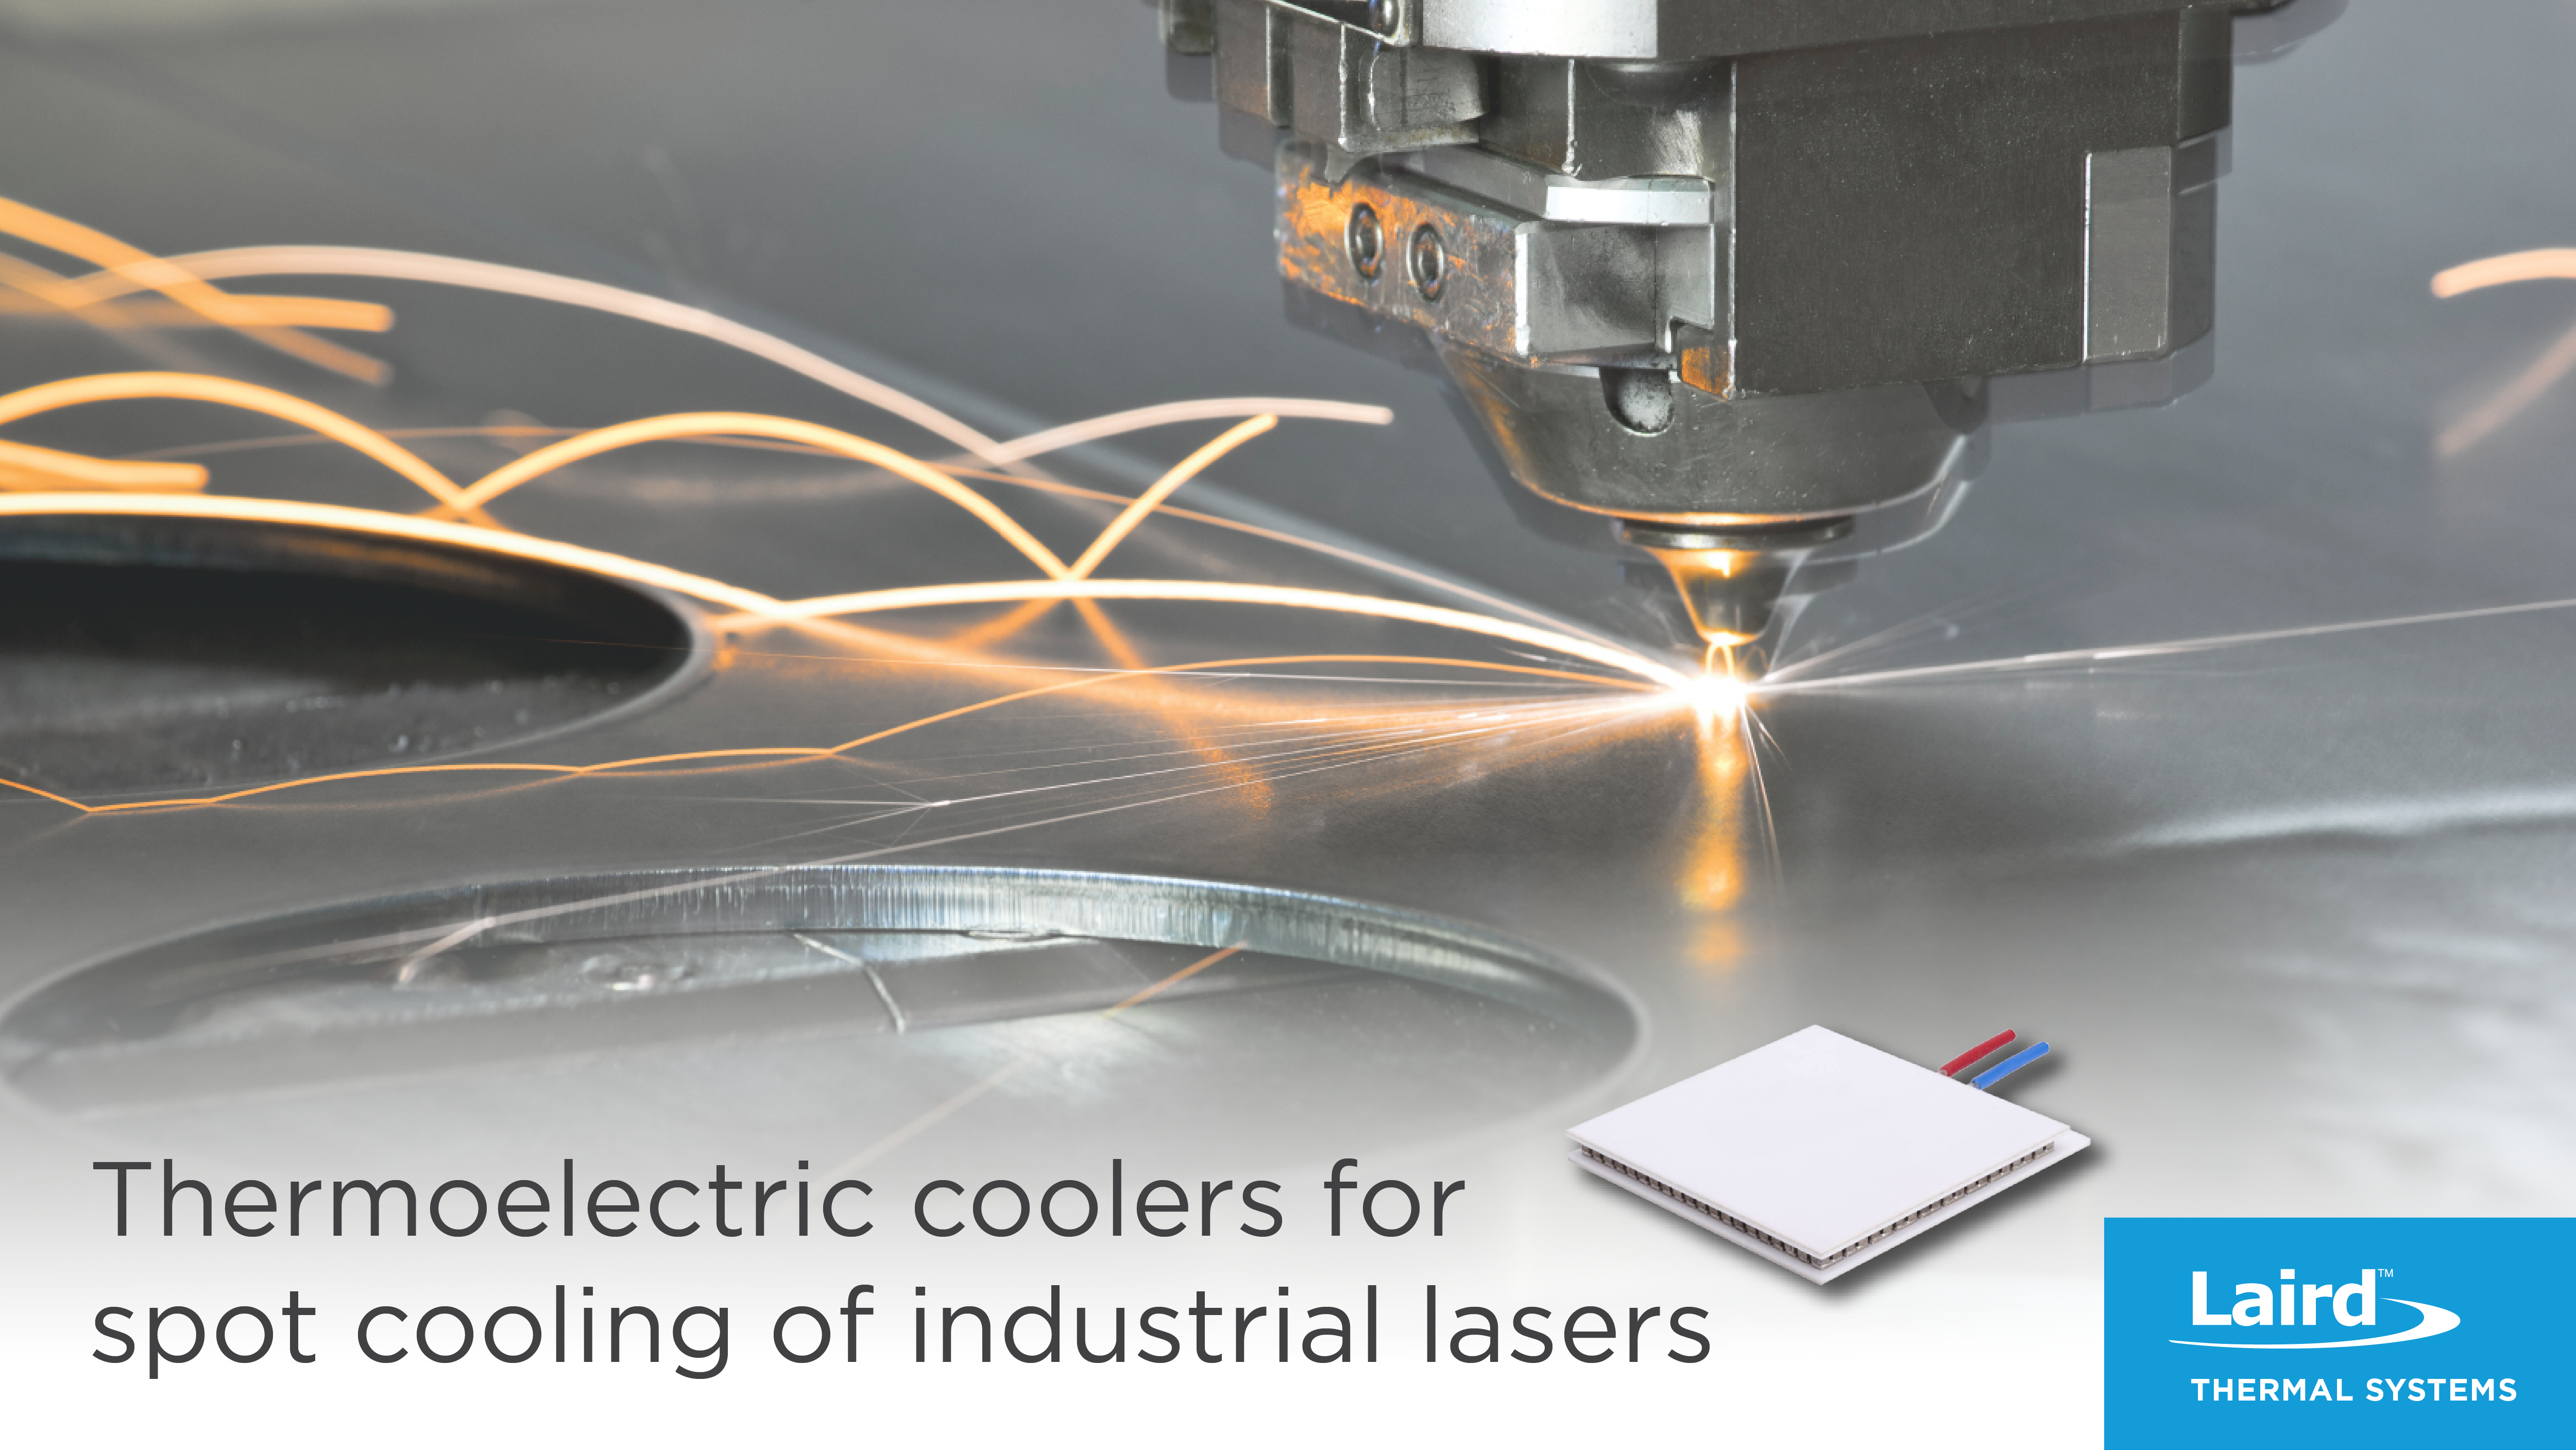 UTX-for-spot-cooling-of-industrial-lasers